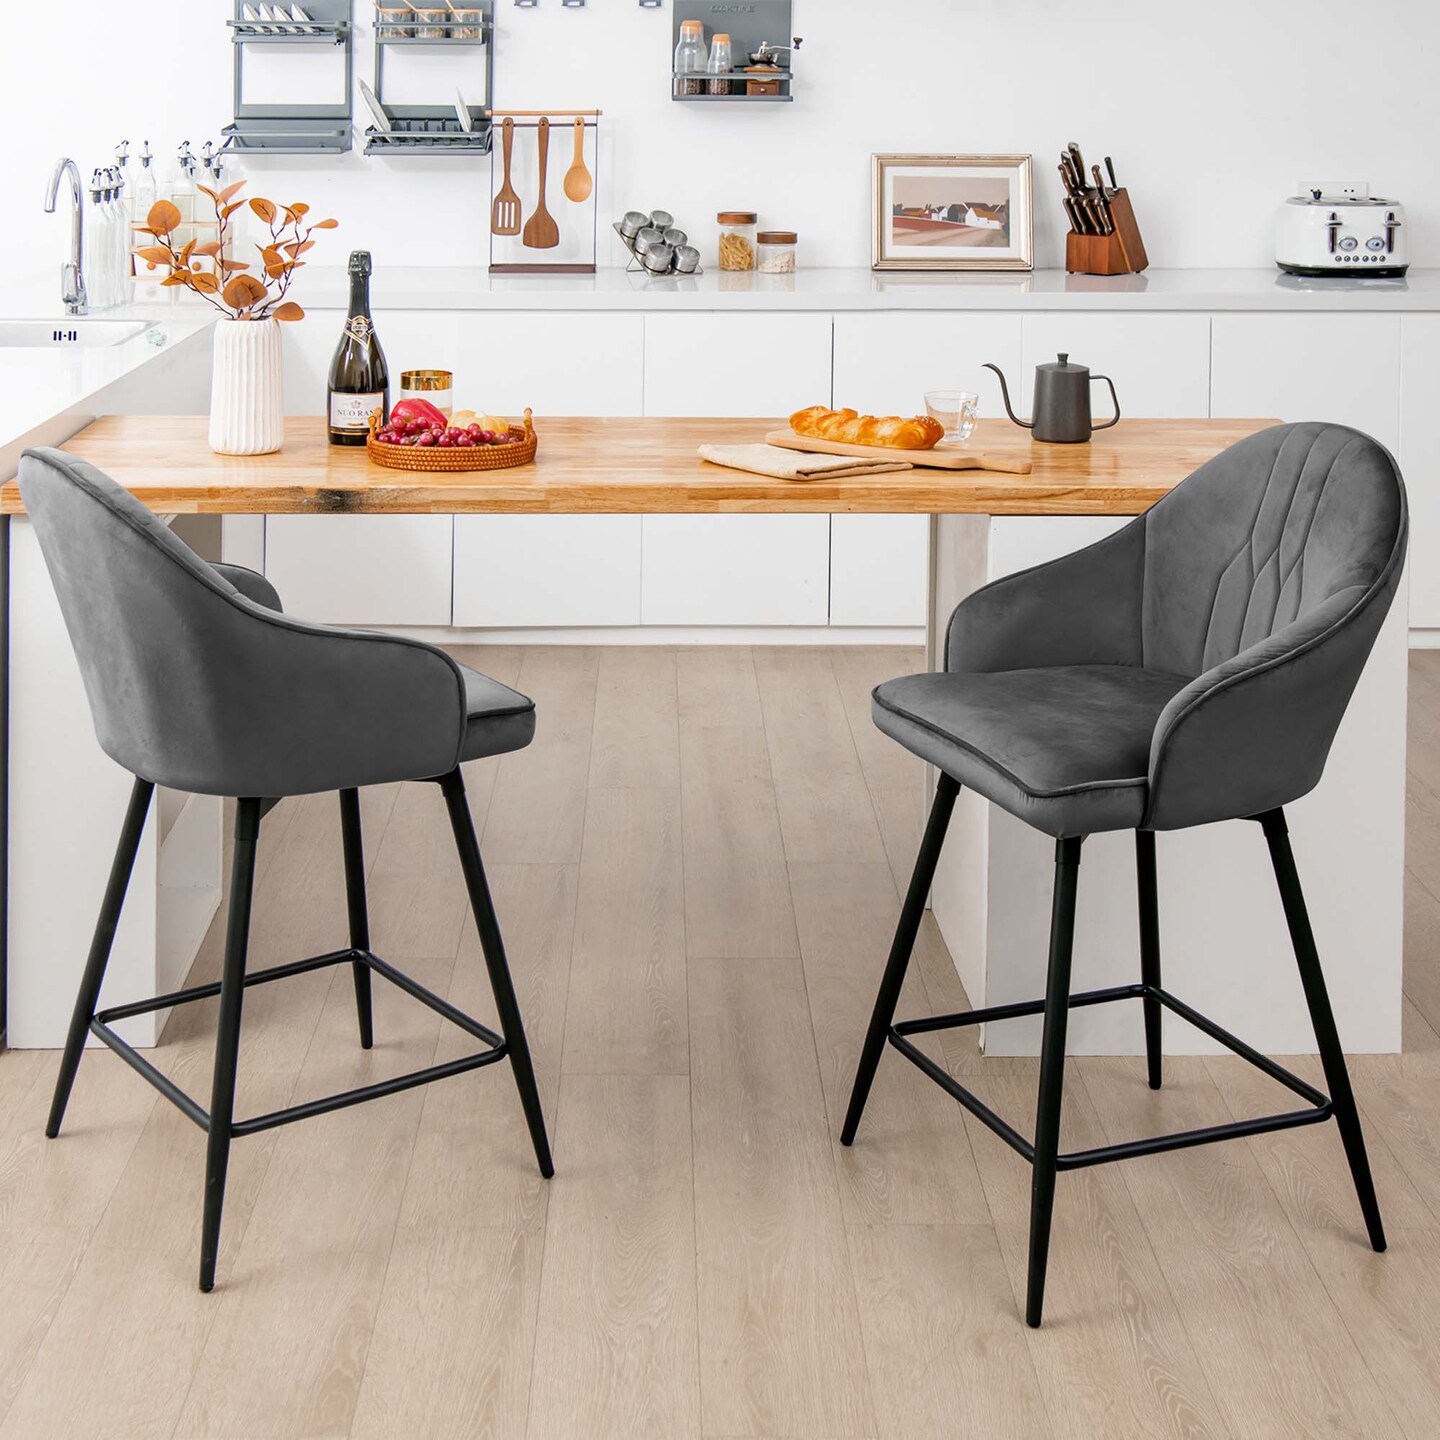 Costway Set of 2 Velvet Bar Stools Swivel Counter Height Dining Chair with Metal Legs Gray